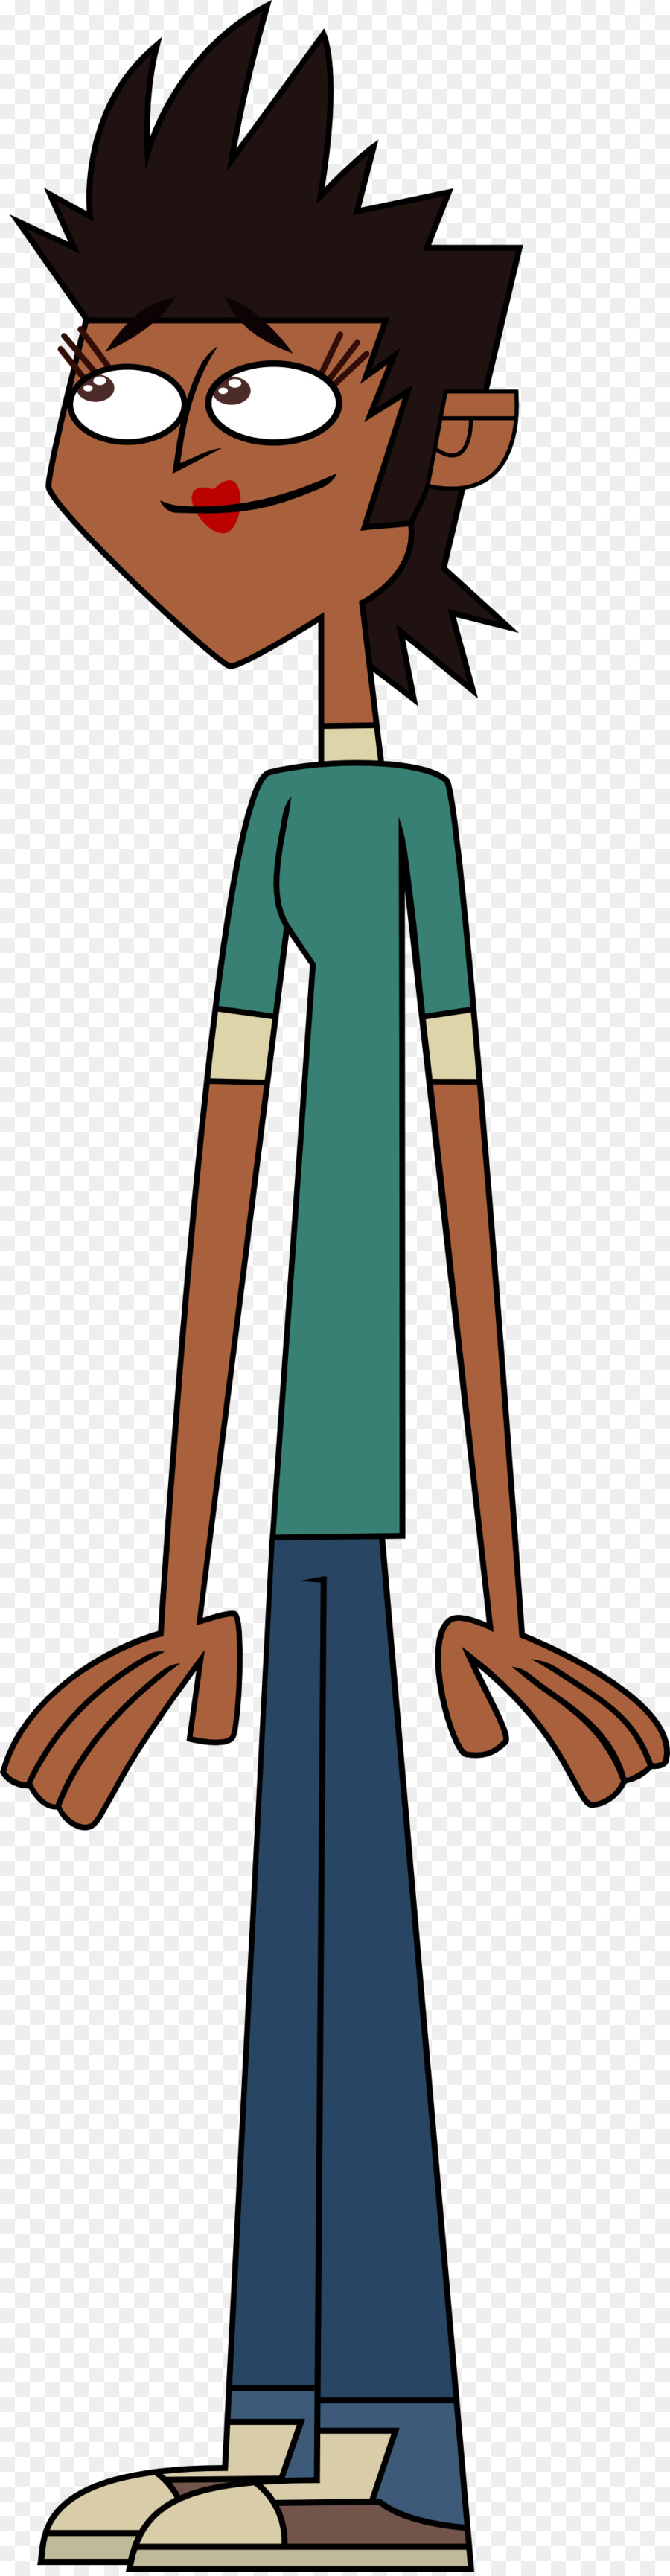 Total Drama Island Standing - Unlimited Download. cleanpng.com. 